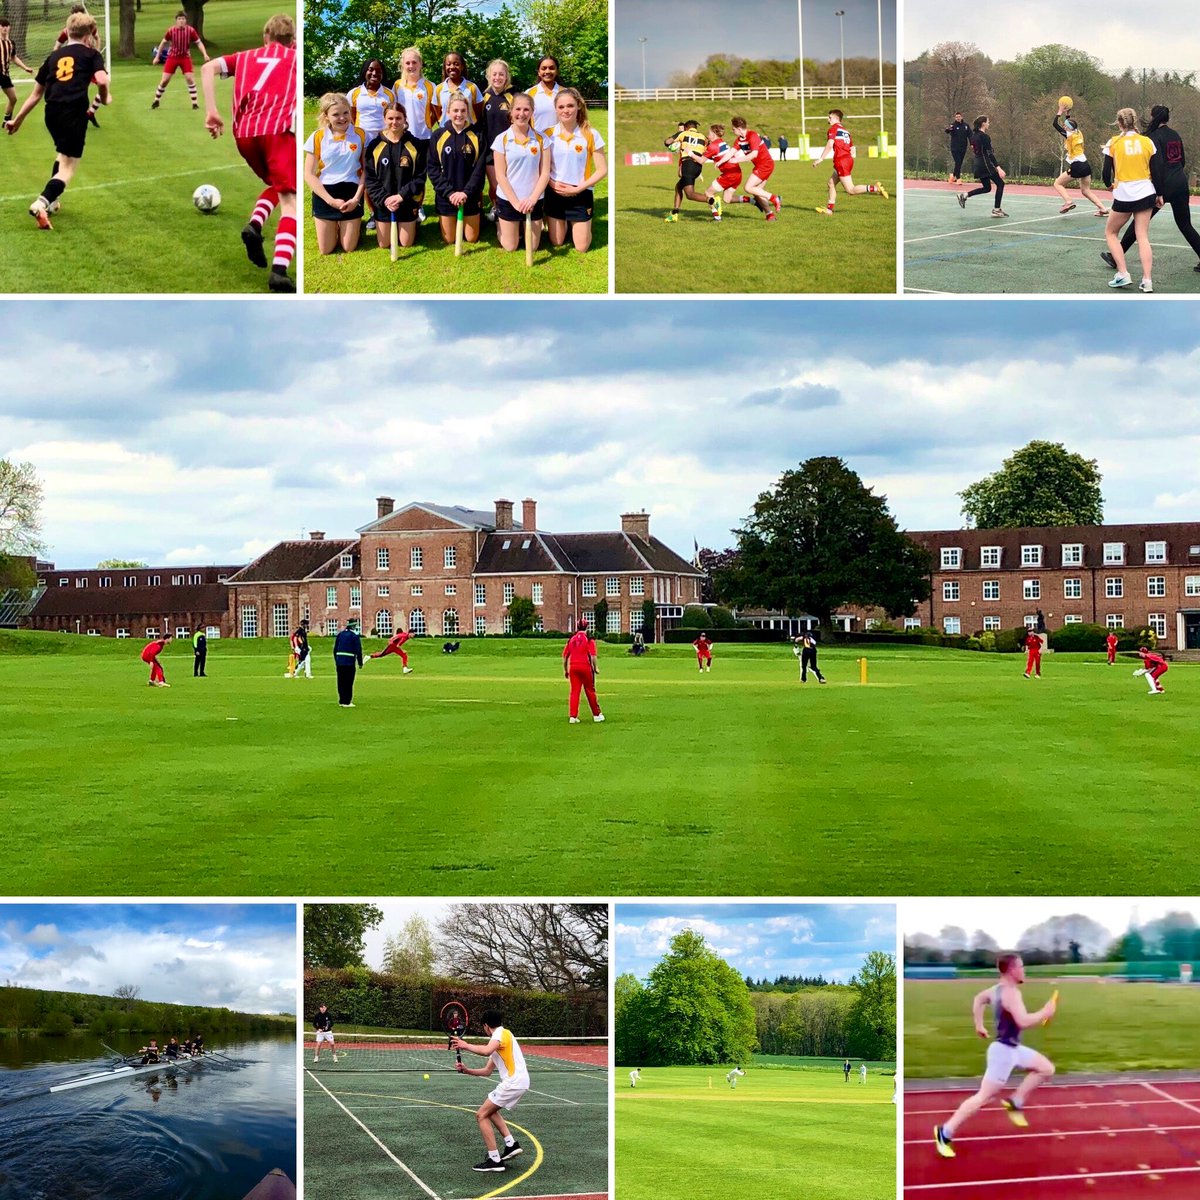 Wonderful that competitive sport has returned #TrinityTerm 🙌🏼 - have a great #HalfTerm 👌🏼